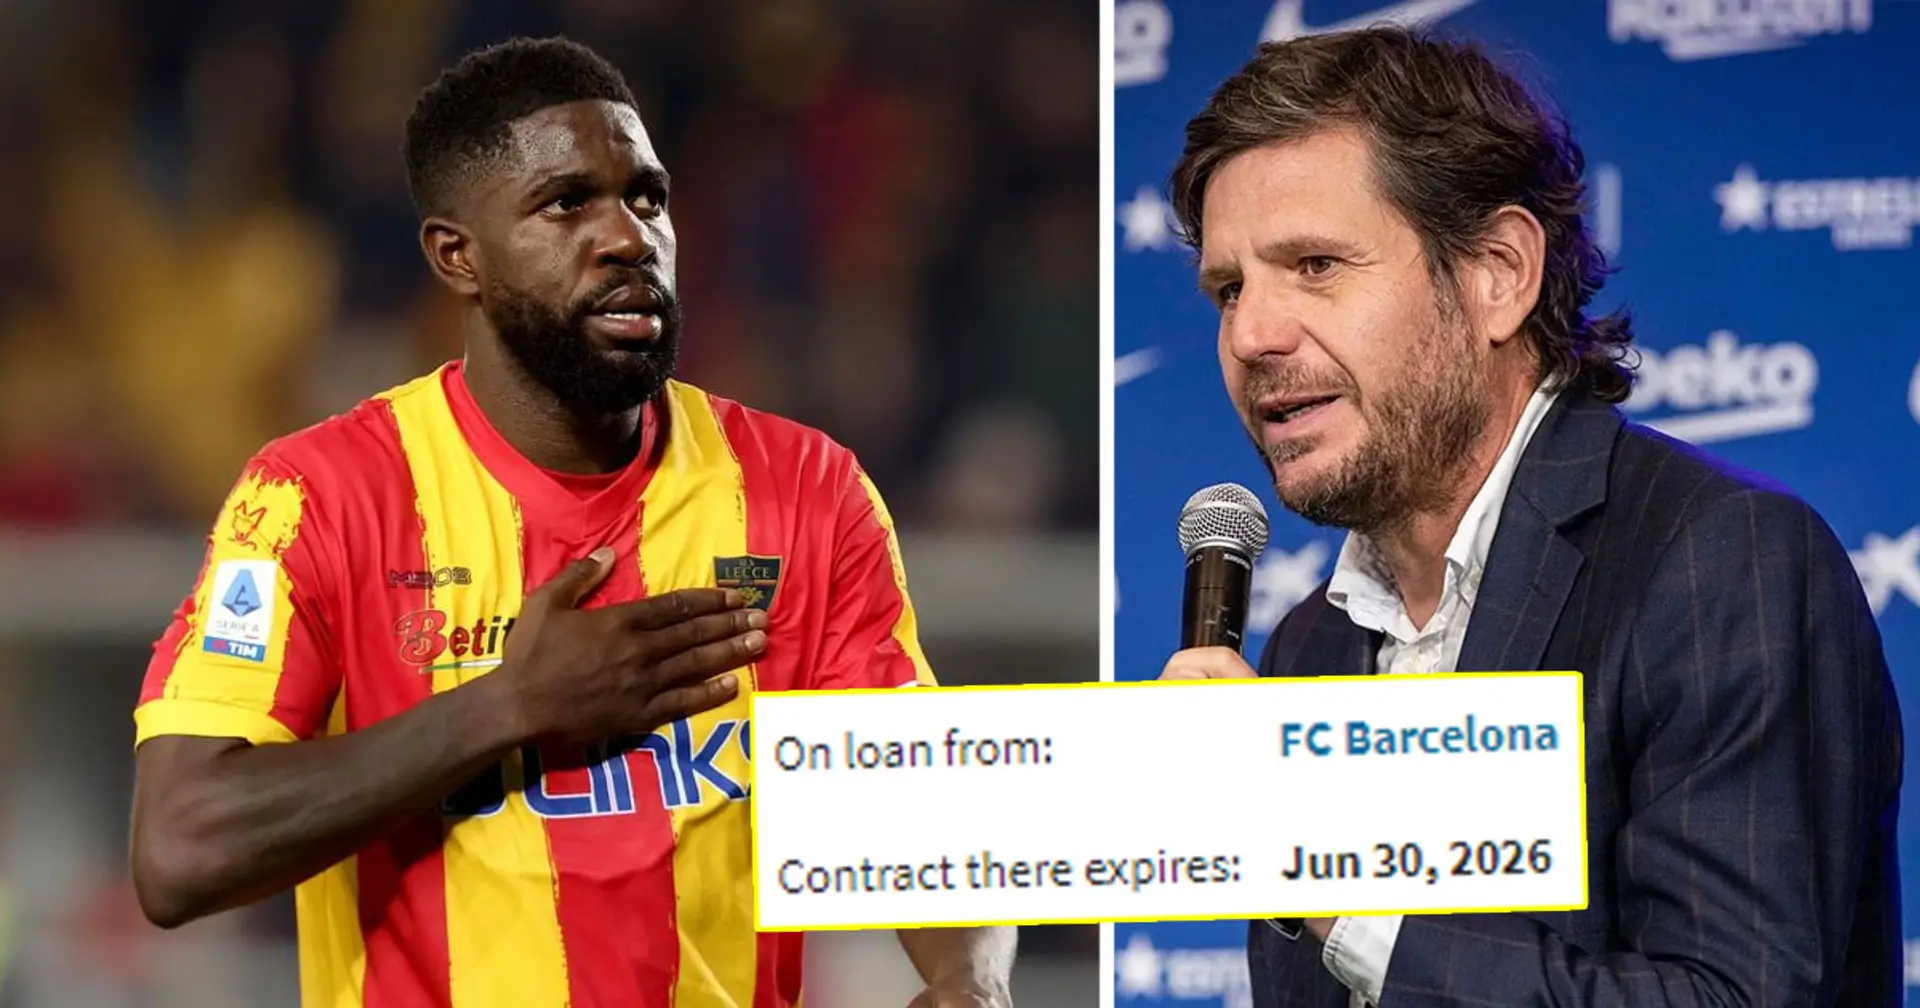 Barca hope to agree contract termination with Umtiti next summer (reliability: 4 stars)